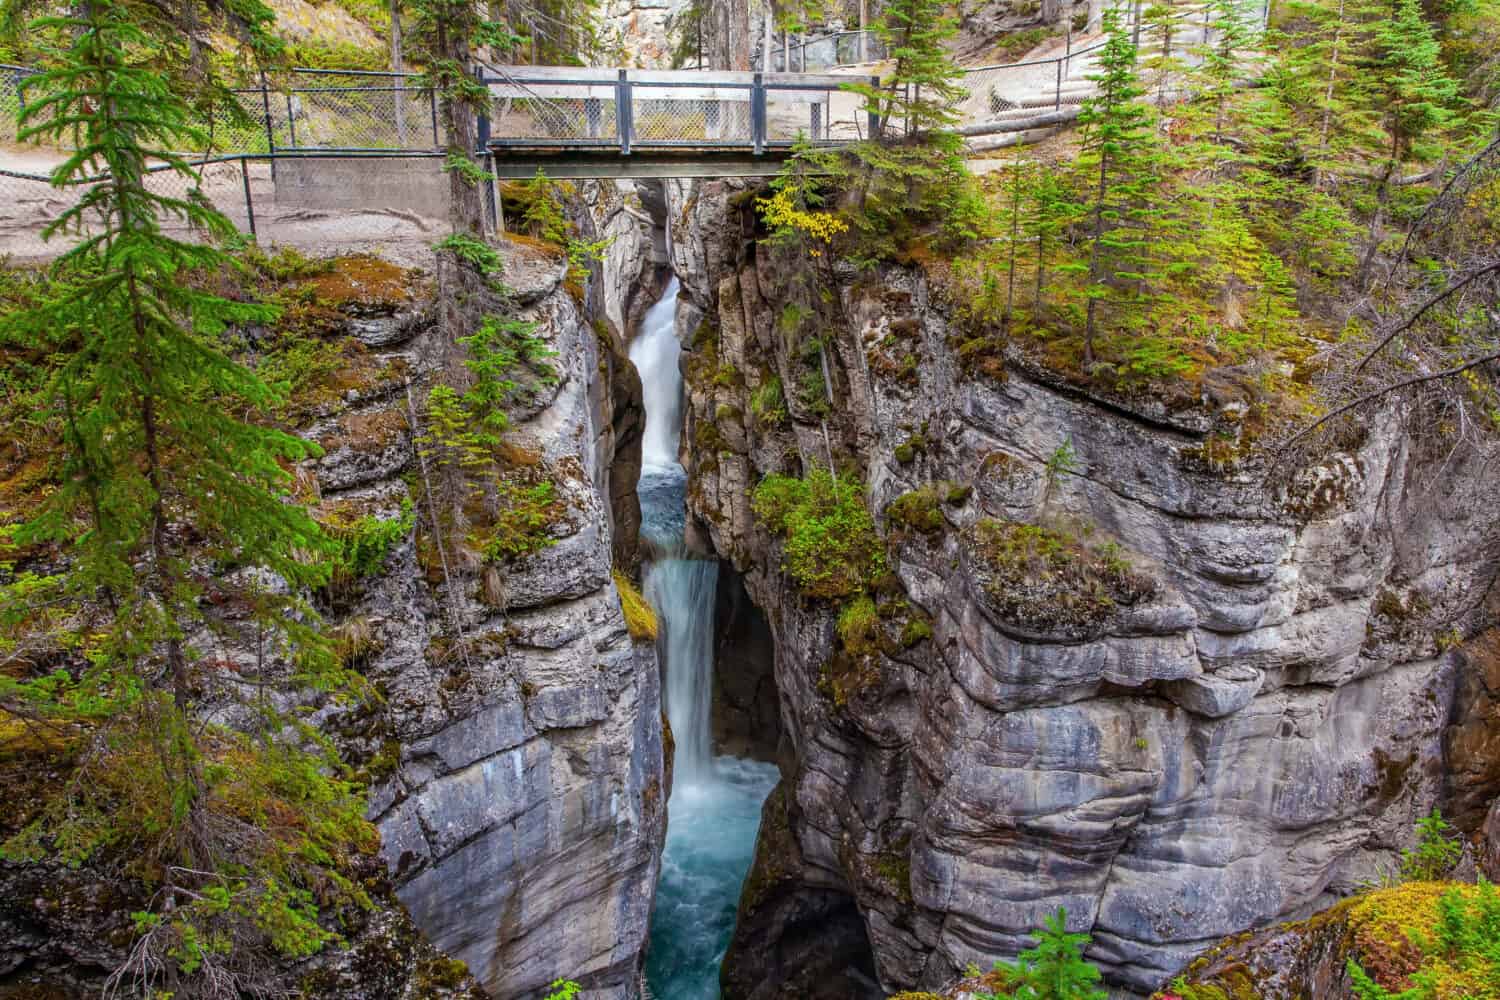 Tourist bridge over a magnificent cascading waterfall in a picturesque gorge Maligne Canyon. Cool cloudy day. Canada. Travel to the Rocky Mountains